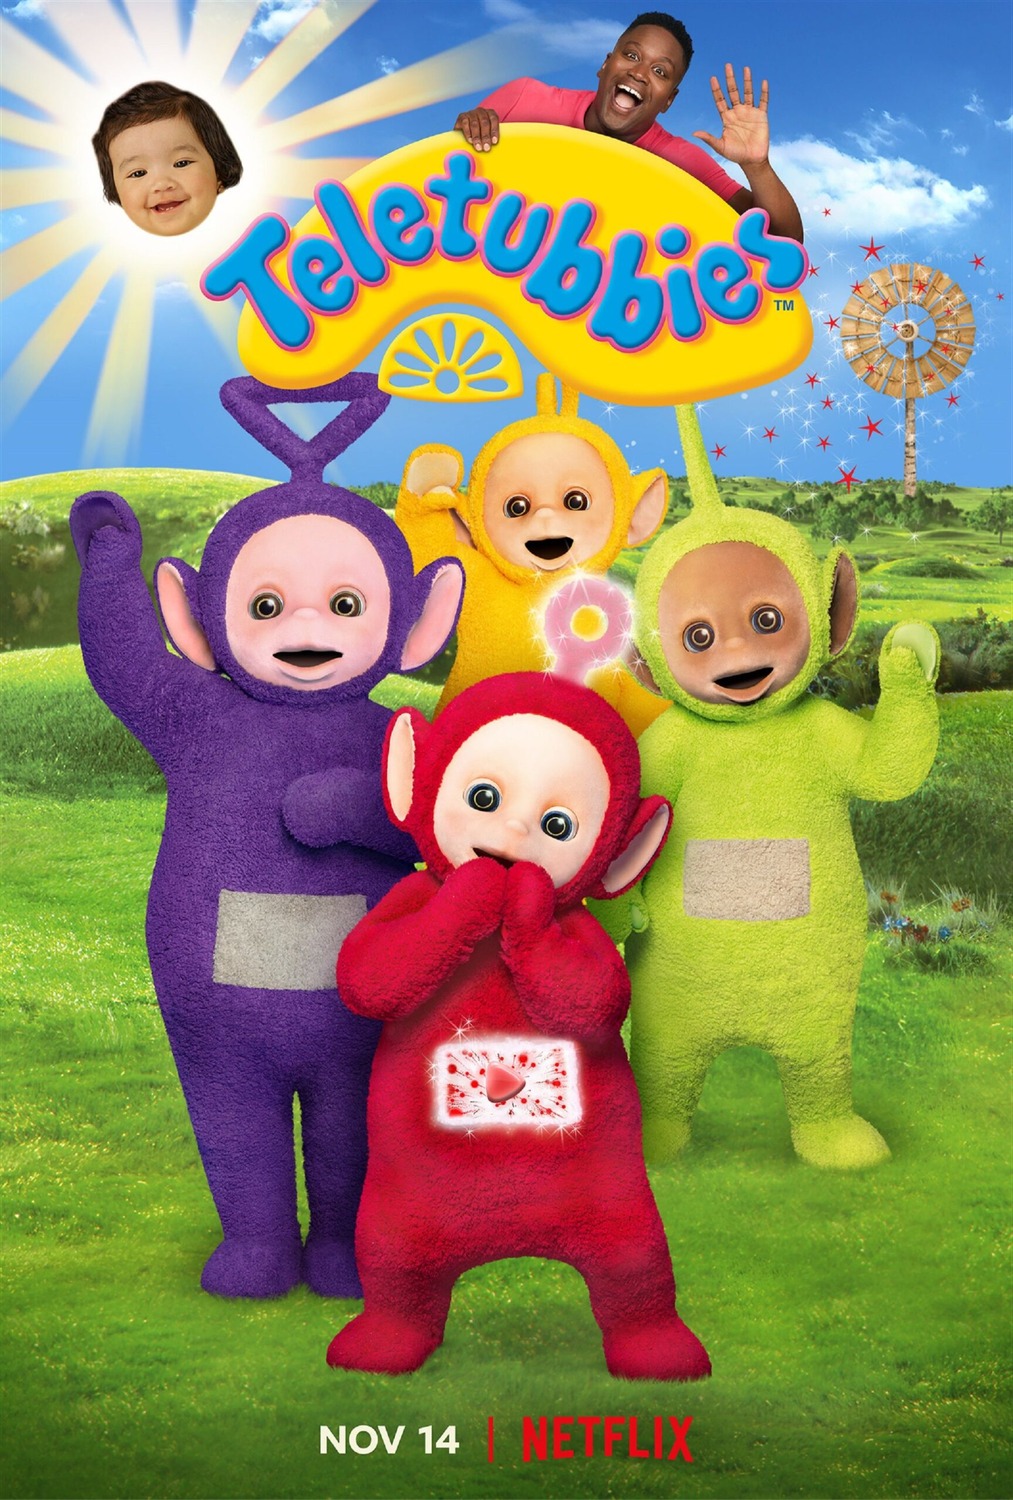 Extra Large TV Poster Image for Teletubbies 